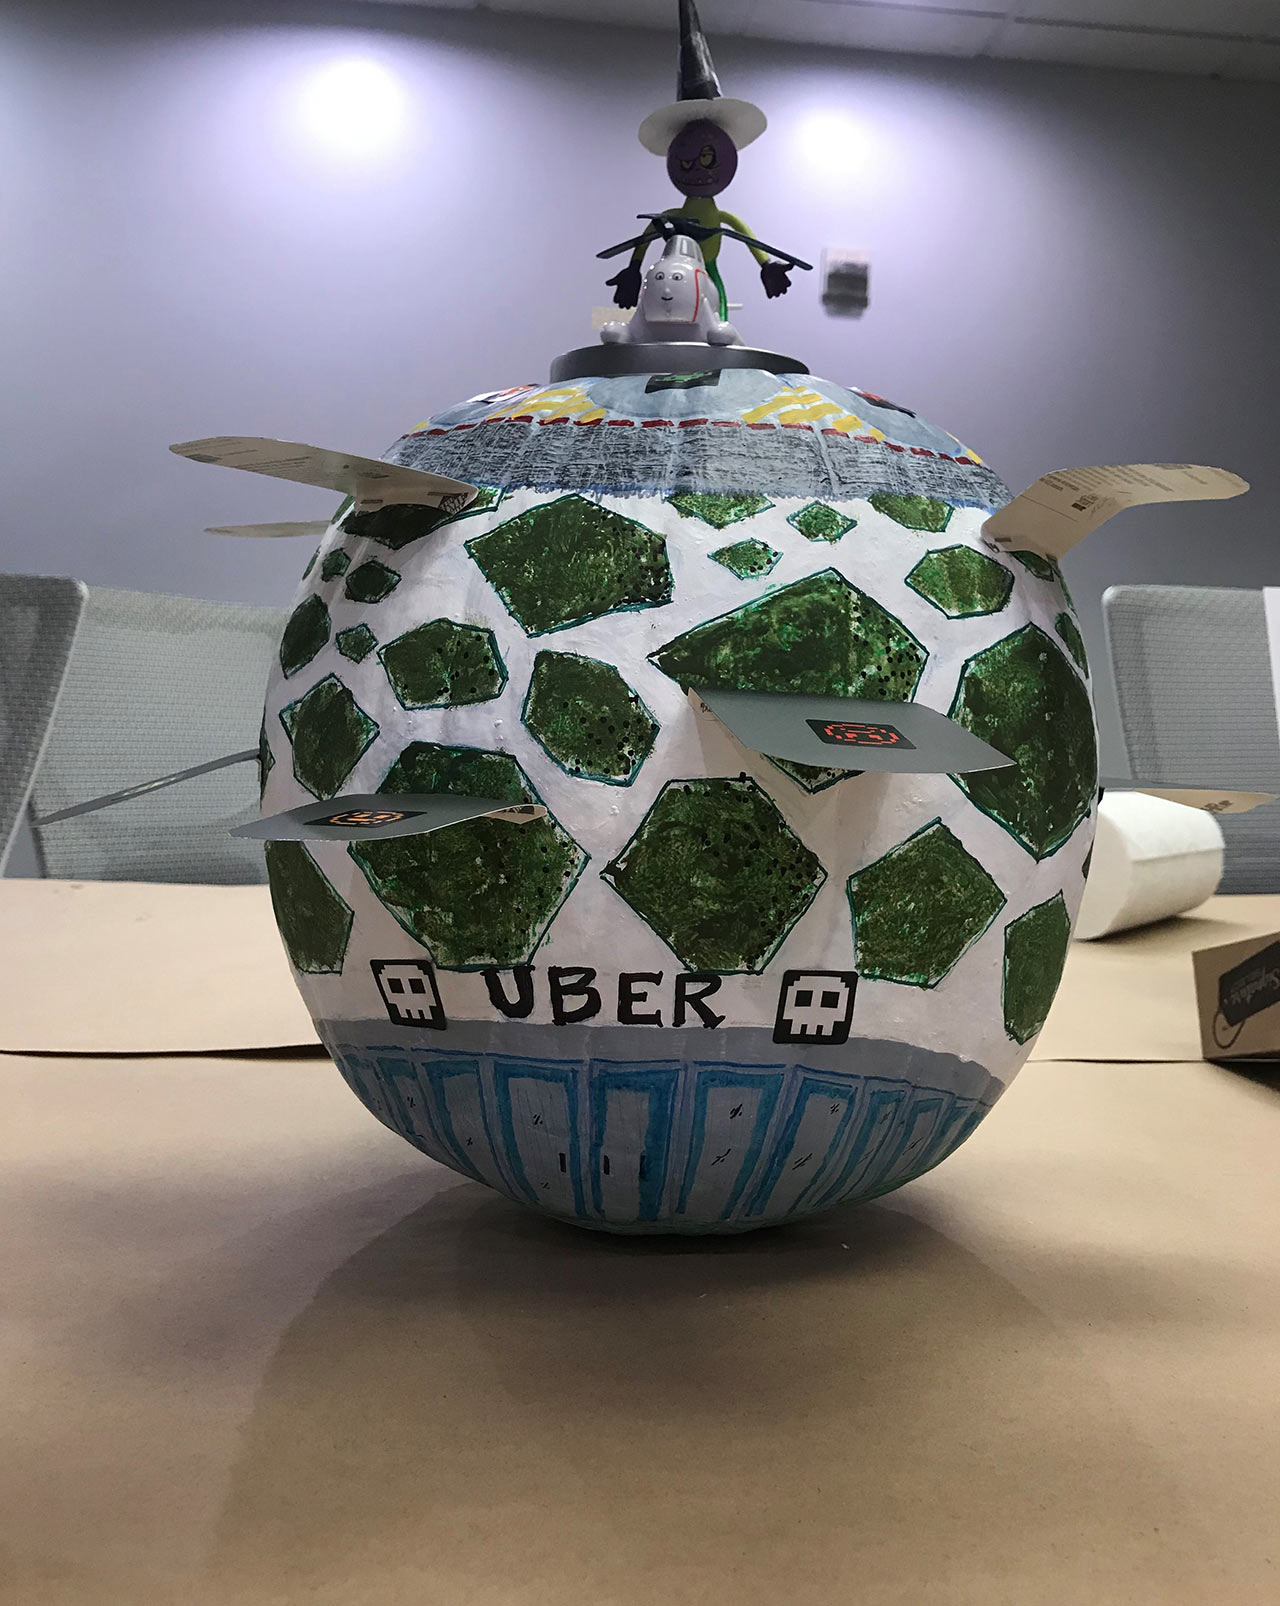 Hpa Blog Halloween 2018 Pumpkin Decorating Contest Second Place